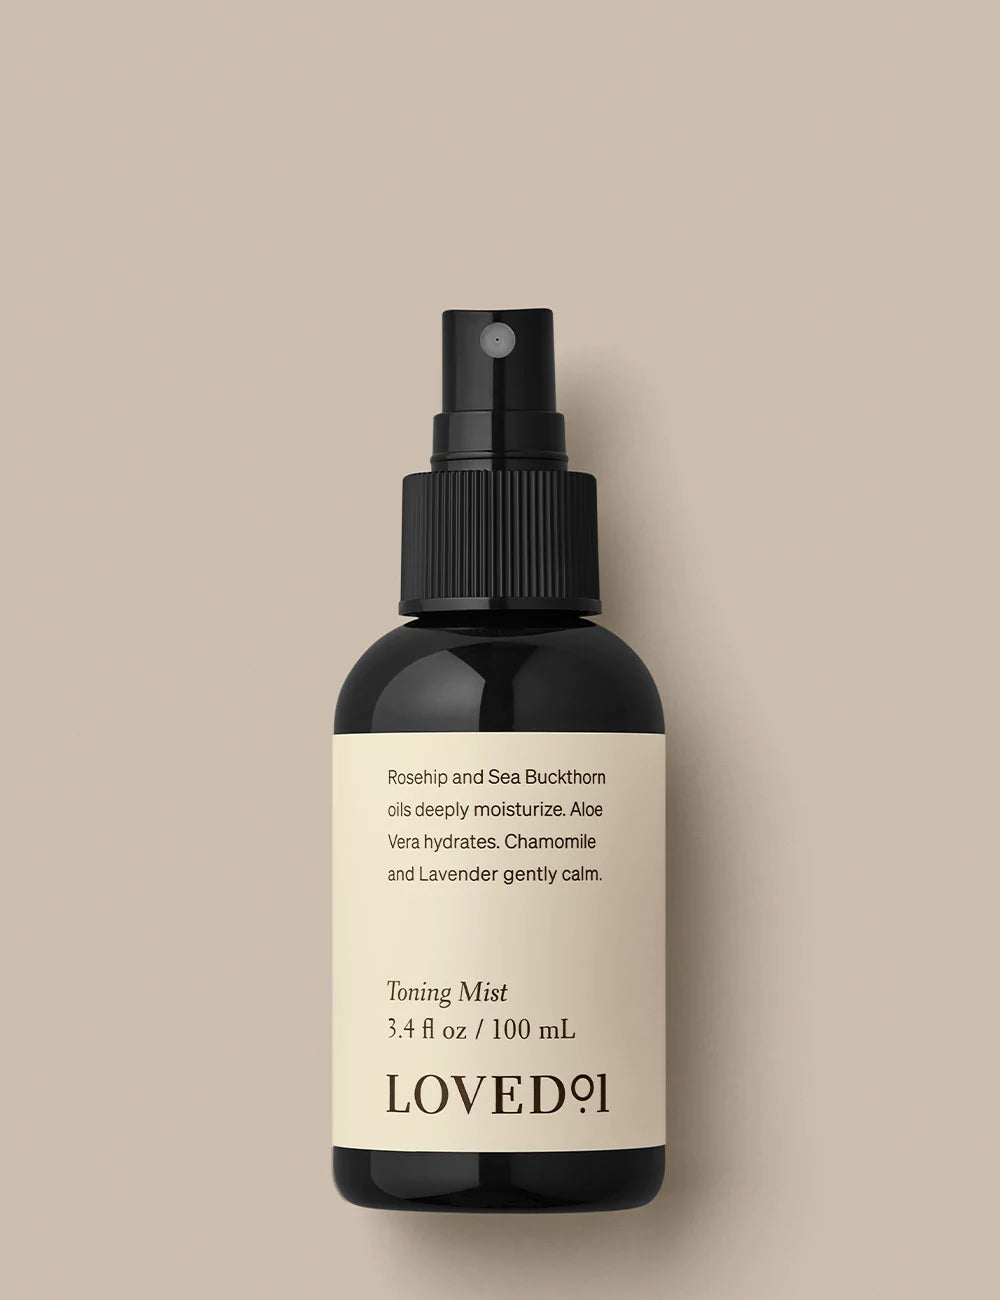 Product image with a tan background. The image shows the Toning Mist.